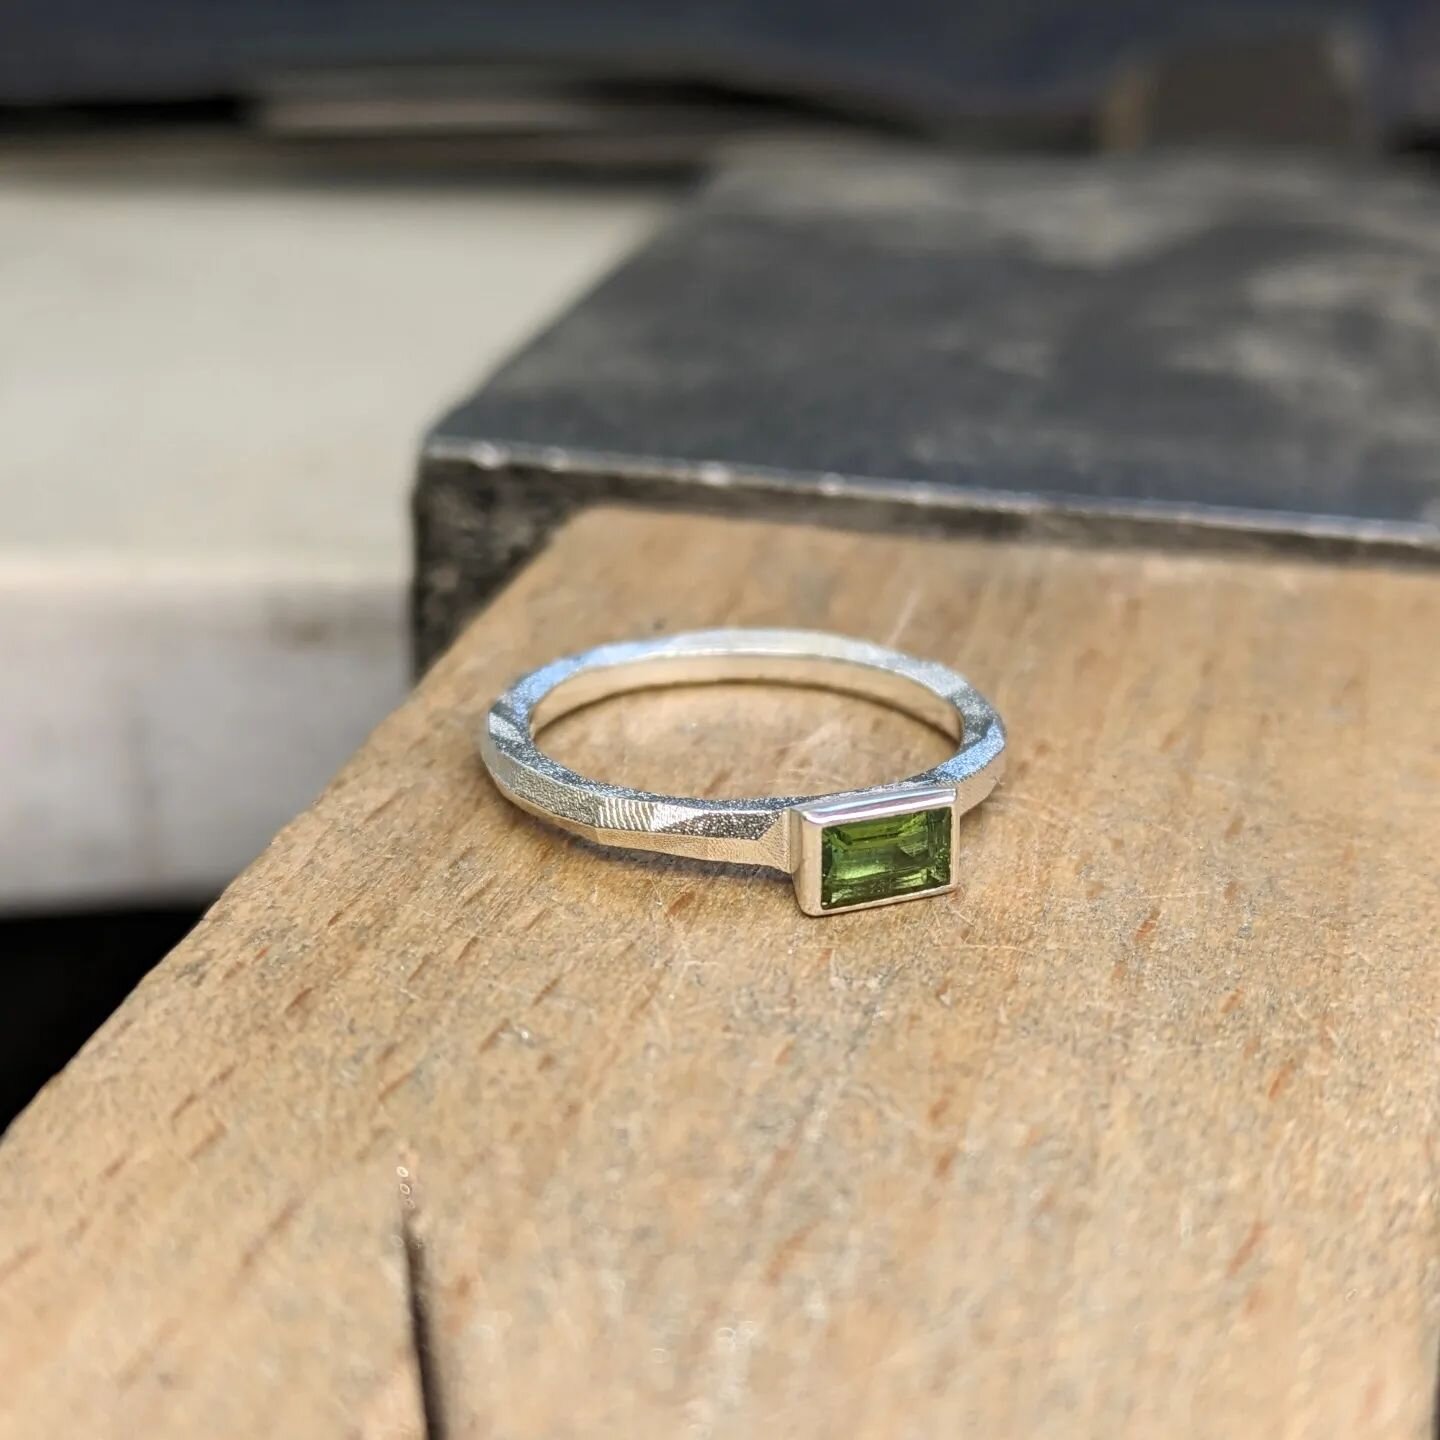 Finishing the week in the workshop with this green tourmaline set into a faceted silver ring. 

#jewellery #facetedring #geometricjewellery #geometricdesign #contemporaryjewellery #greentourmaline #silverring